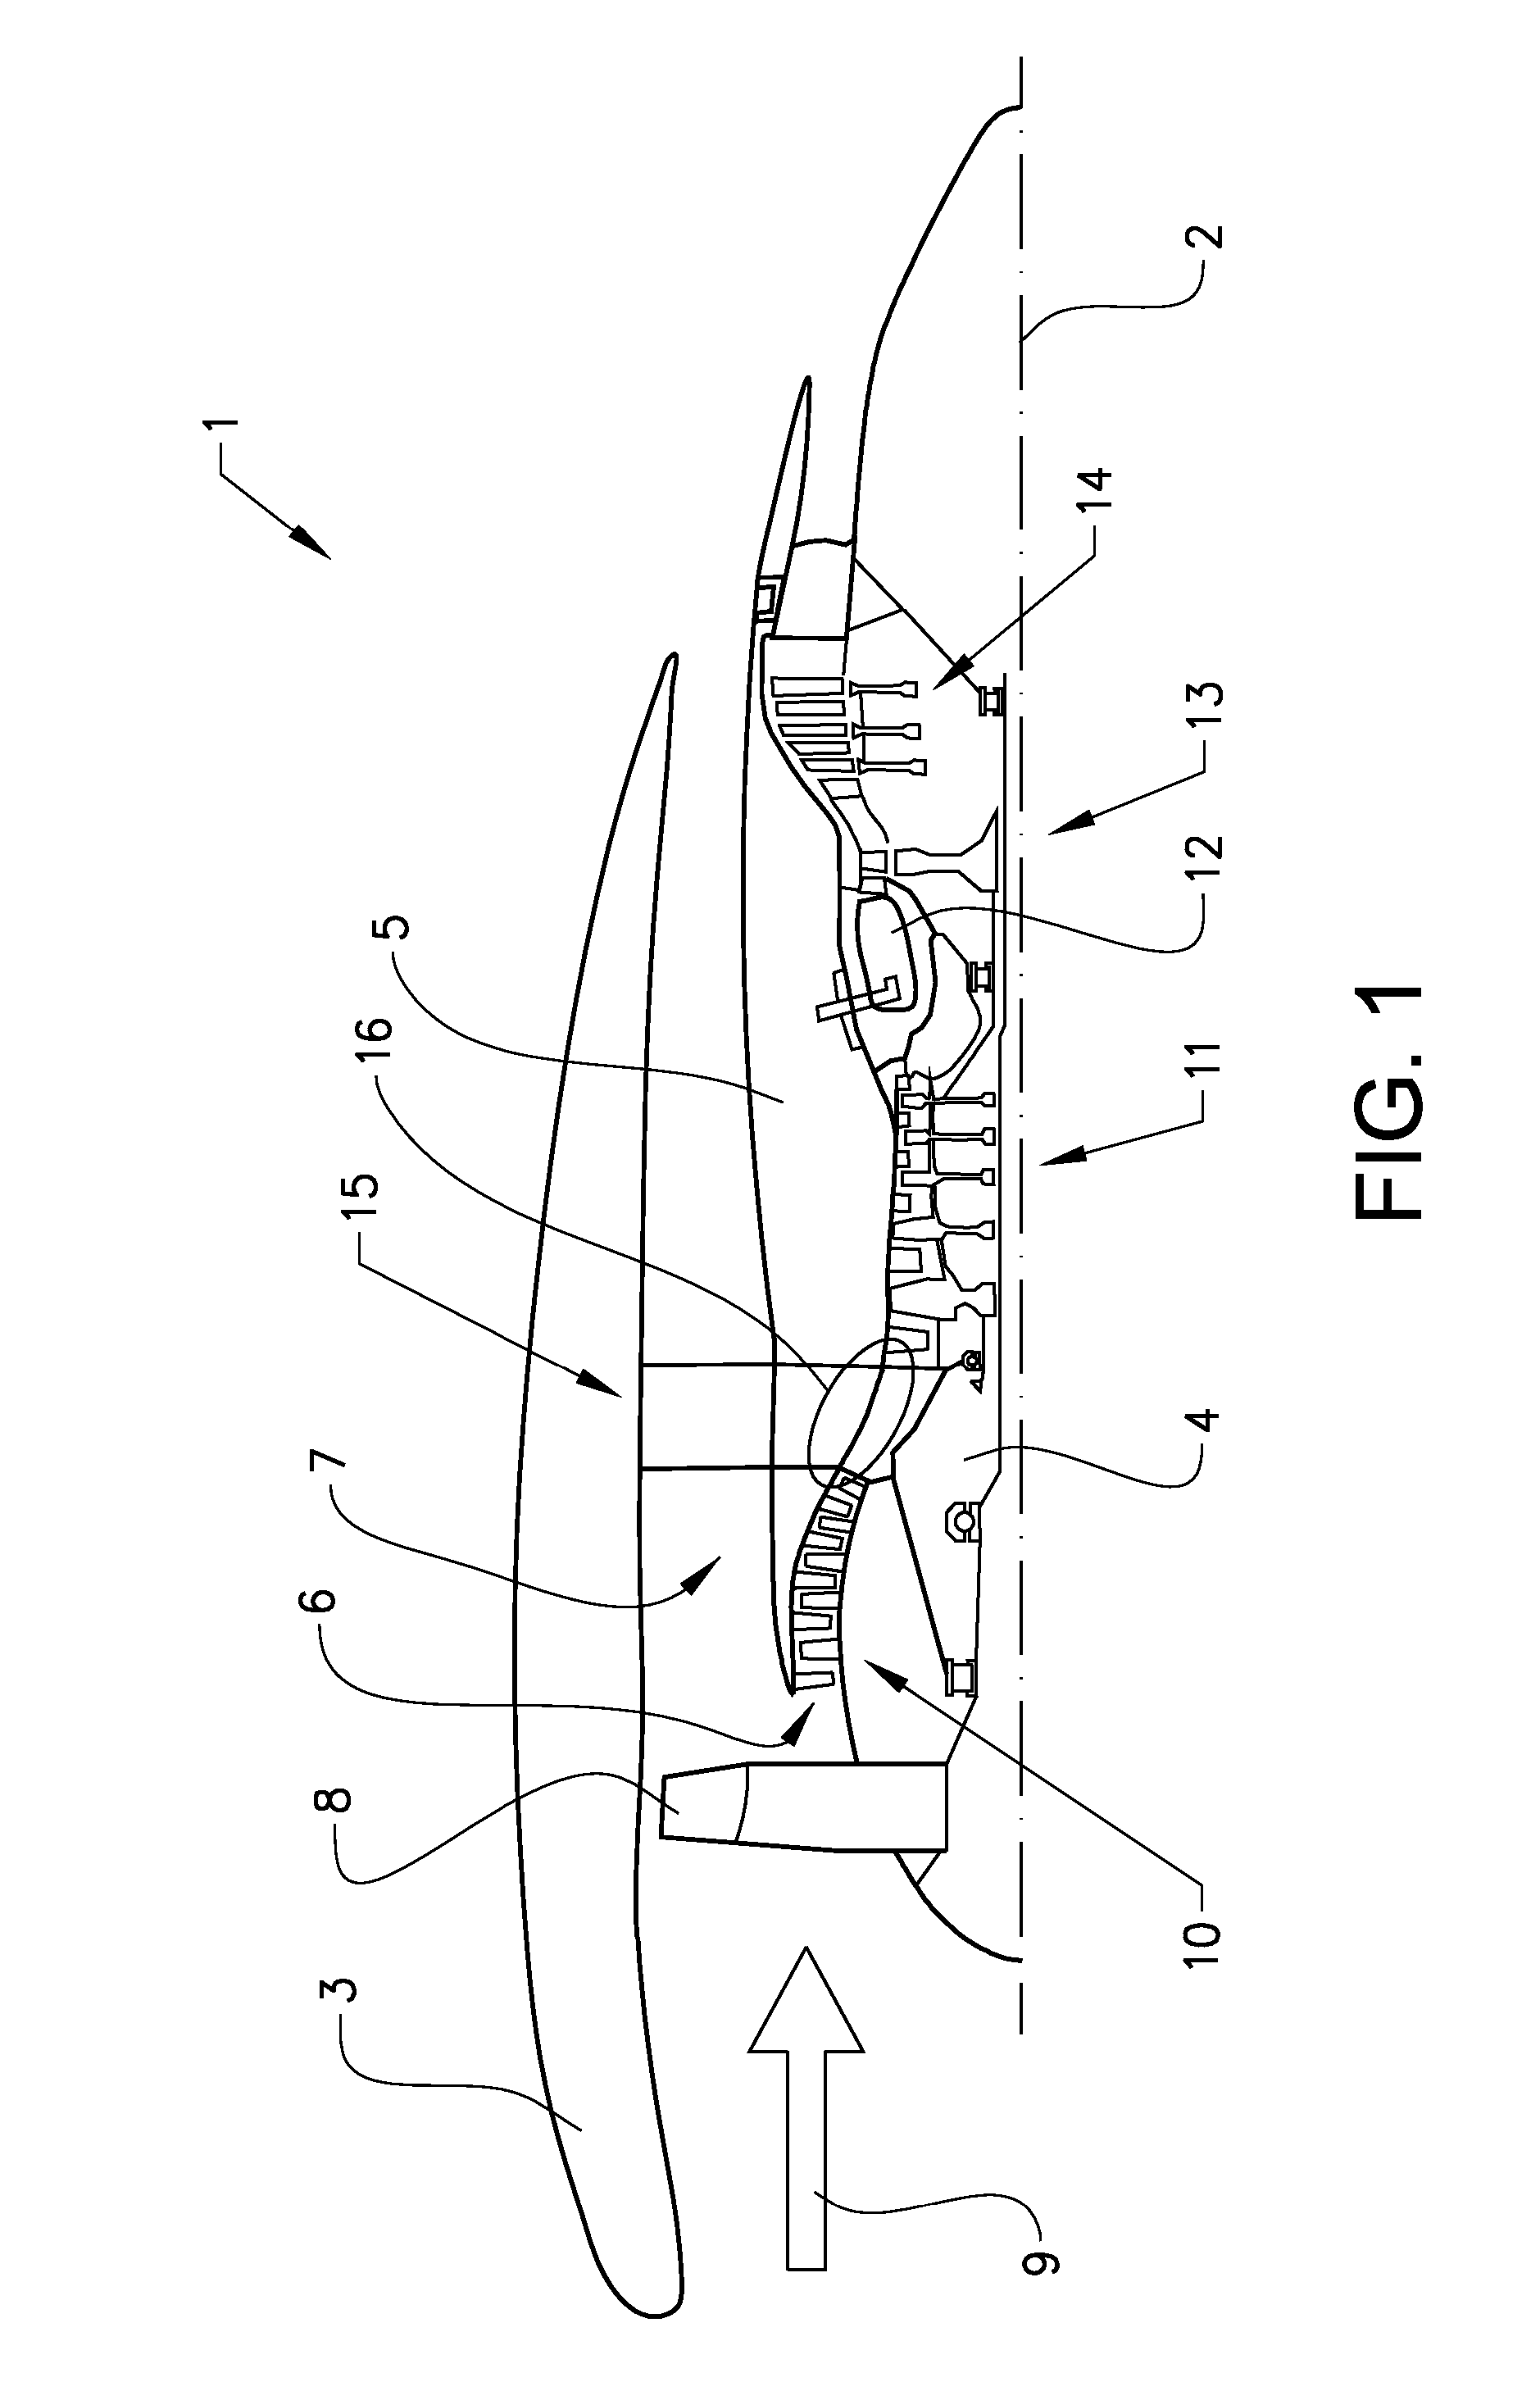 Device for moving at least one moveable element in a gas turbine